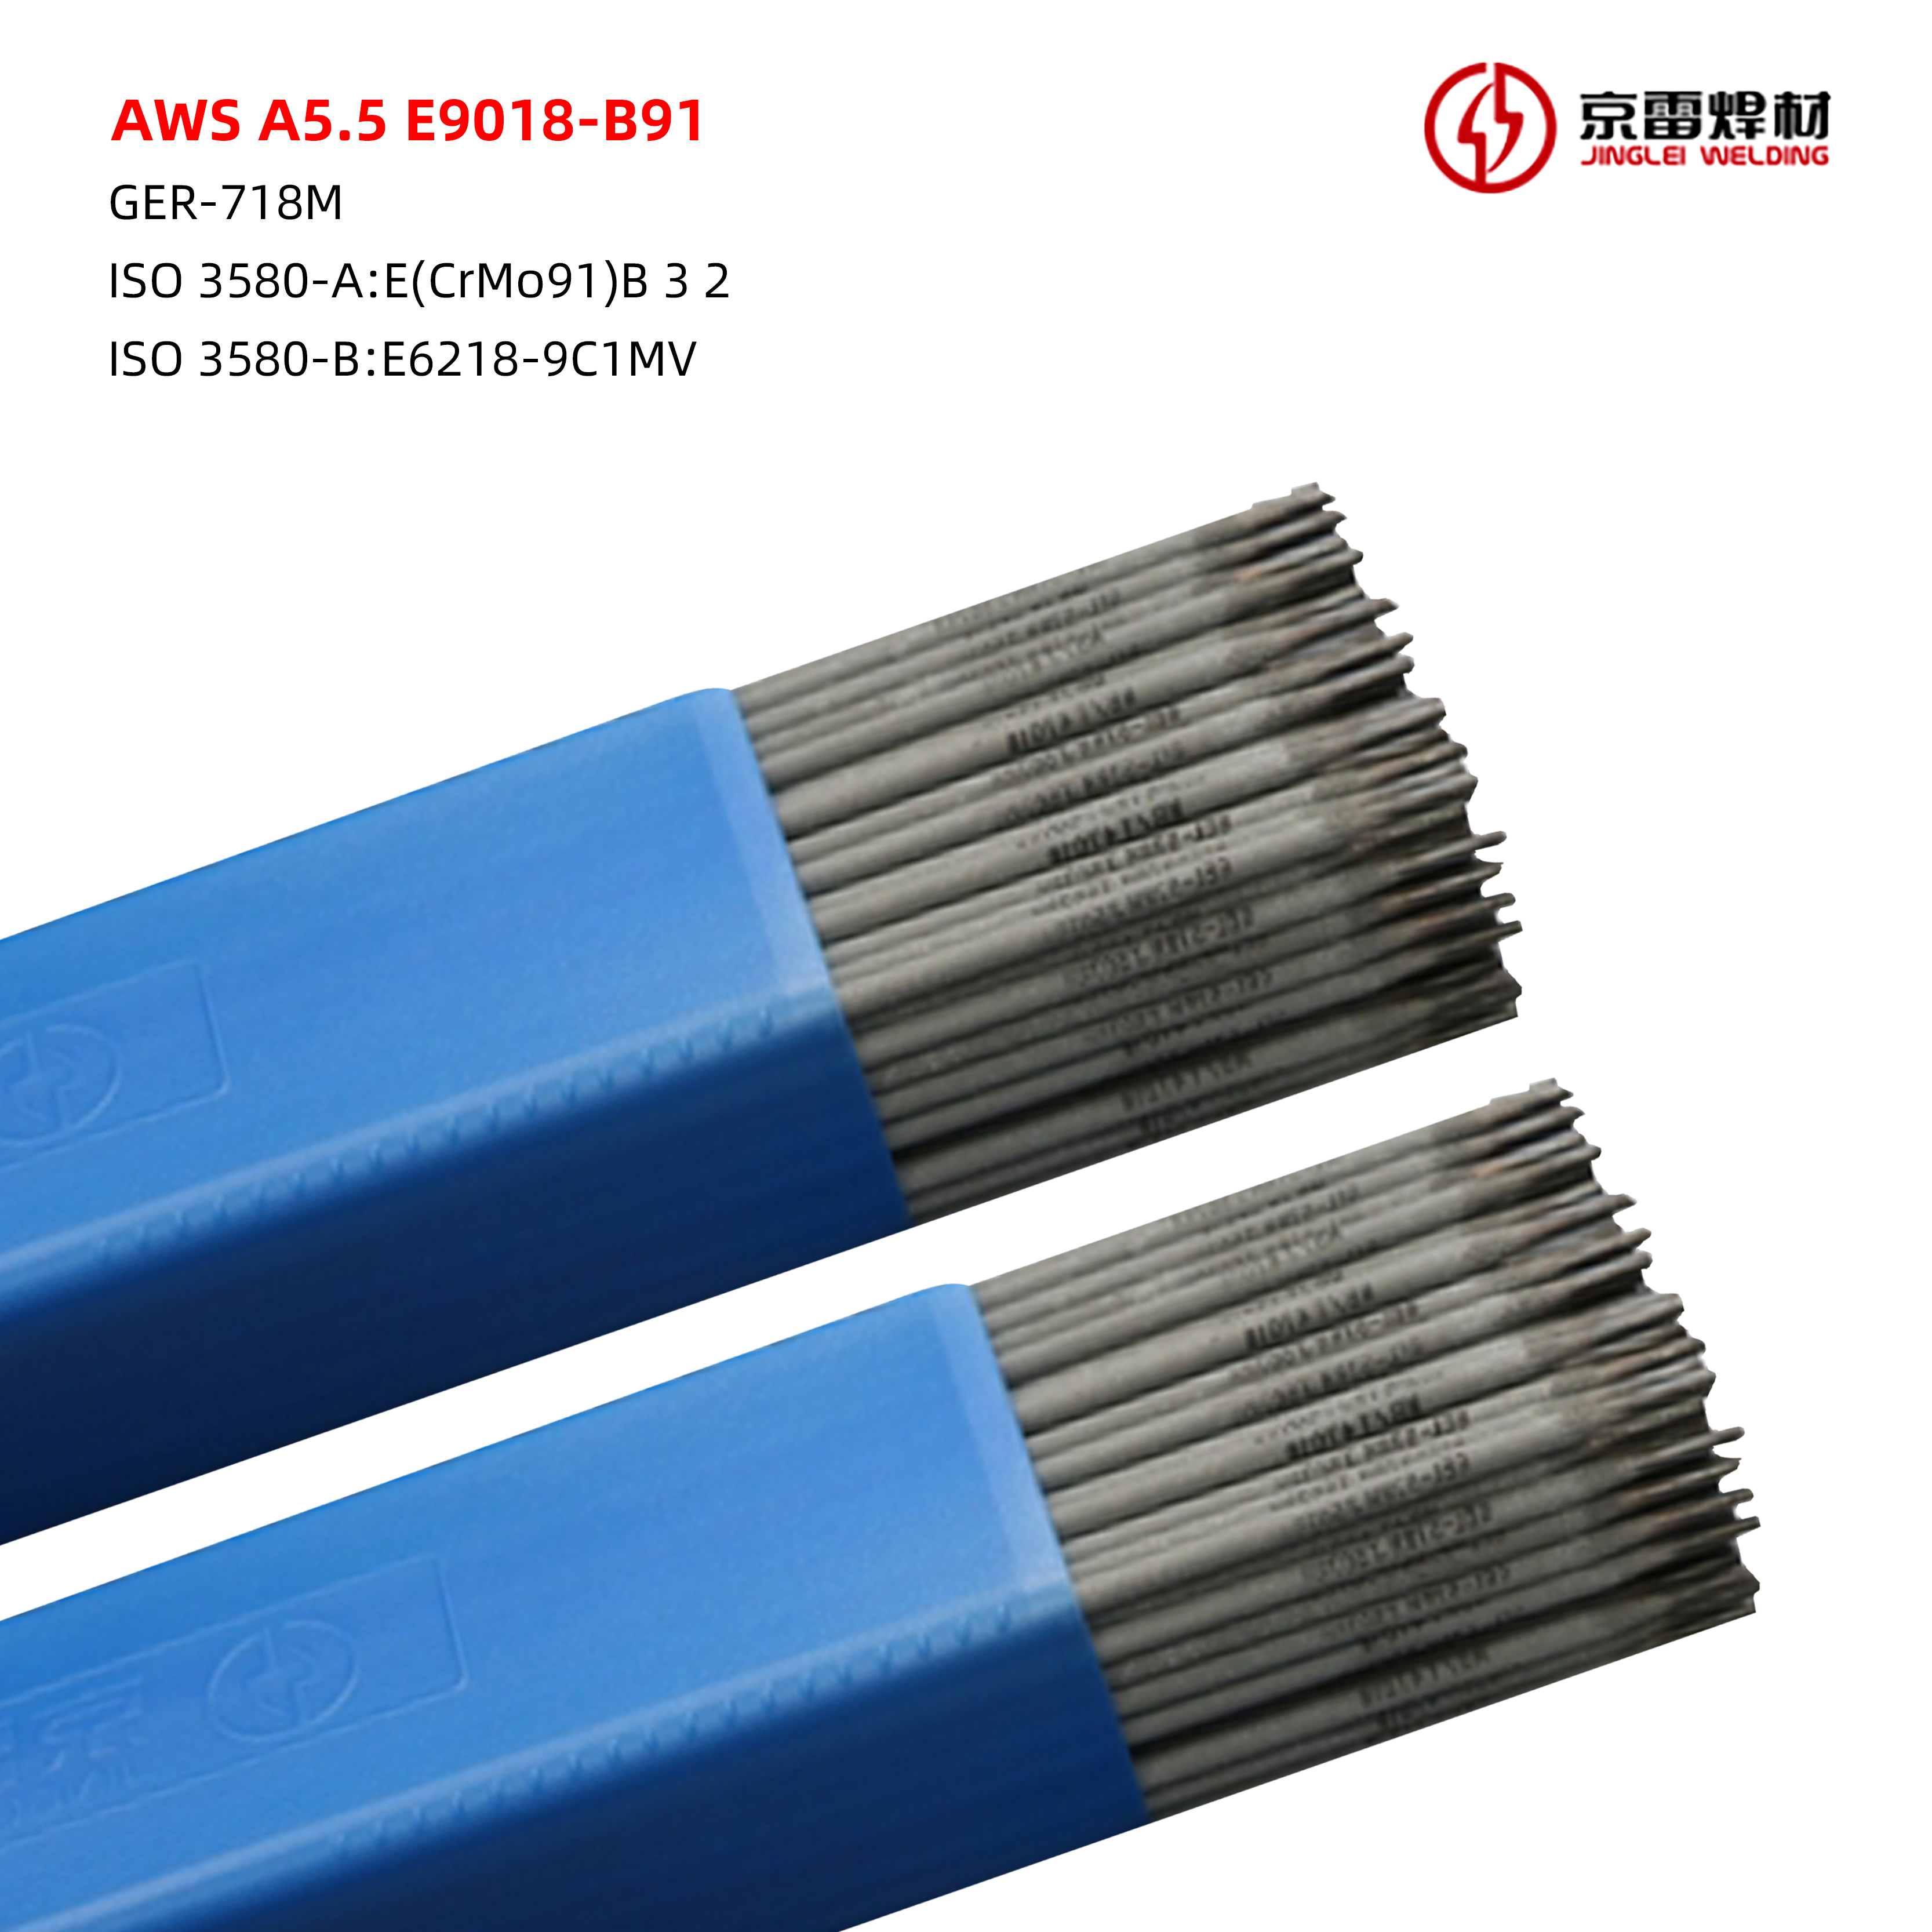 Low-Alloy Steels Manual Electrode E9018-B91 VLCC ship crude oil soldering